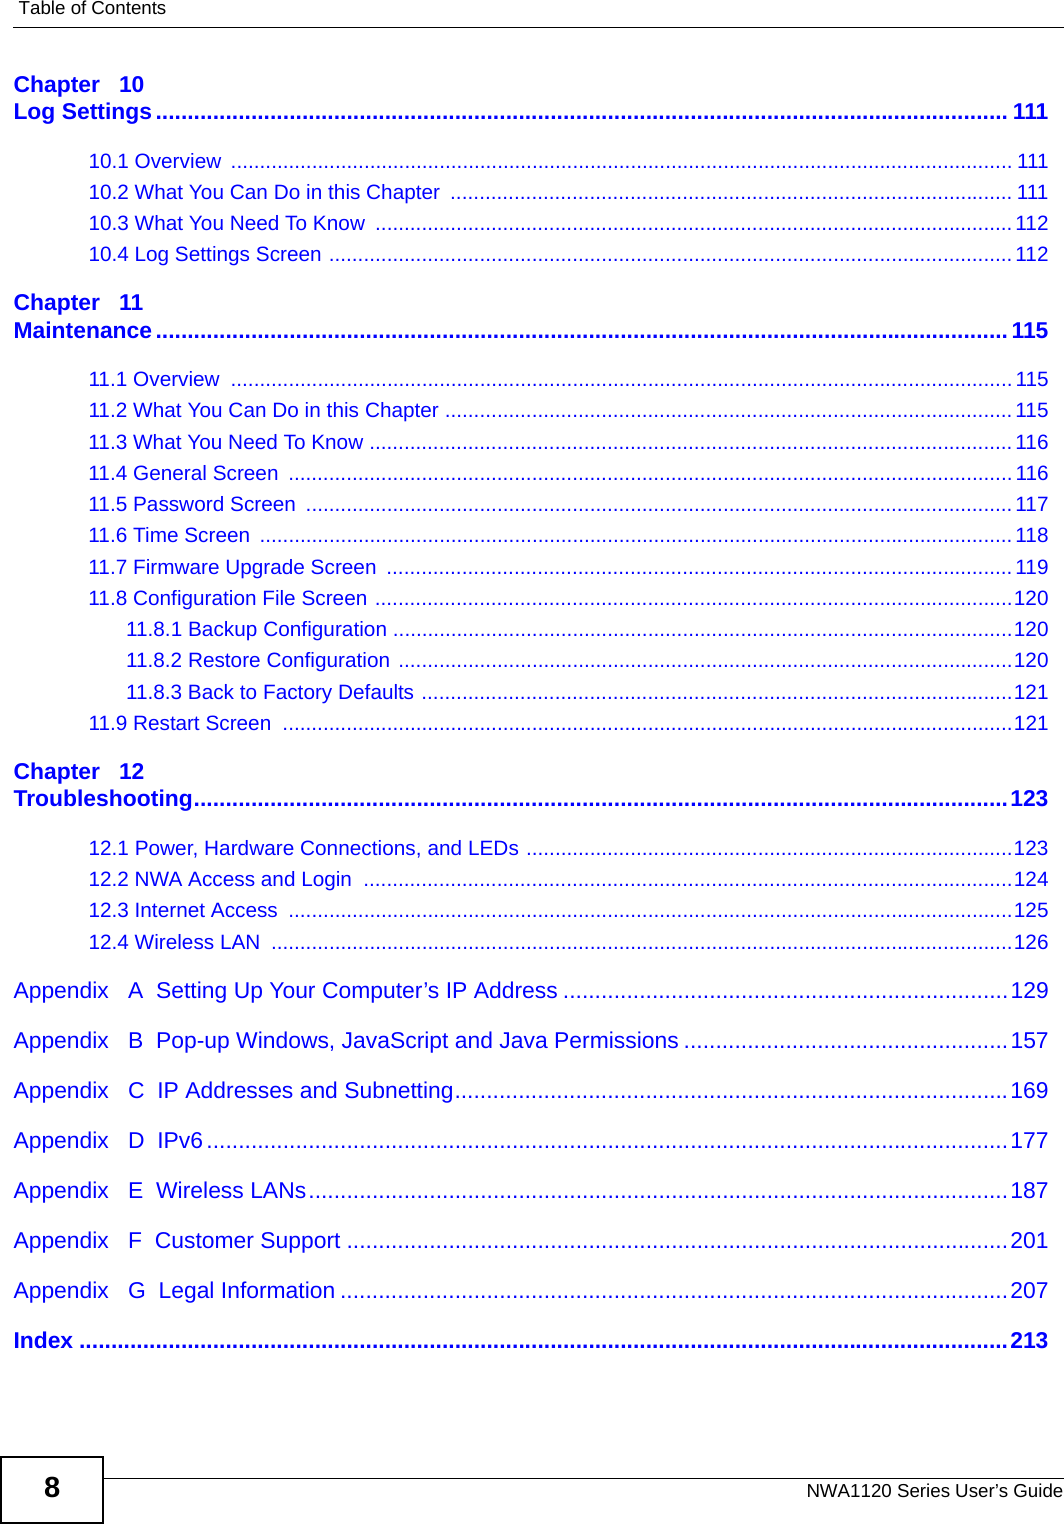 Table of ContentsNWA1120 Series User’s Guide8Chapter   10Log Settings...................................................................................................................................... 11110.1 Overview  ....................................................................................................................................... 11110.2 What You Can Do in this Chapter  ................................................................................................. 11110.3 What You Need To Know  .............................................................................................................. 11210.4 Log Settings Screen ...................................................................................................................... 112Chapter   11Maintenance......................................................................................................................................11511.1 Overview  .......................................................................................................................................11511.2 What You Can Do in this Chapter .................................................................................................. 11511.3 What You Need To Know ............................................................................................................... 11611.4 General Screen  .............................................................................................................................11611.5 Password Screen  .......................................................................................................................... 11711.6 Time Screen  .................................................................................................................................. 11811.7 Firmware Upgrade Screen  ............................................................................................................ 11911.8 Configuration File Screen ..............................................................................................................12011.8.1 Backup Configuration ...........................................................................................................12011.8.2 Restore Configuration ..........................................................................................................12011.8.3 Back to Factory Defaults ......................................................................................................12111.9 Restart Screen  ..............................................................................................................................121Chapter   12Troubleshooting................................................................................................................................12312.1 Power, Hardware Connections, and LEDs ....................................................................................12312.2 NWA Access and Login  ................................................................................................................12412.3 Internet Access  .............................................................................................................................12512.4 Wireless LAN  ................................................................................................................................126Appendix   A  Setting Up Your Computer’s IP Address ......................................................................129Appendix   B  Pop-up Windows, JavaScript and Java Permissions ...................................................157Appendix   C  IP Addresses and Subnetting.......................................................................................169Appendix   D  IPv6..............................................................................................................................177Appendix   E  Wireless LANs..............................................................................................................187Appendix   F  Customer Support ........................................................................................................201Appendix   G  Legal Information .........................................................................................................207Index ..................................................................................................................................................213